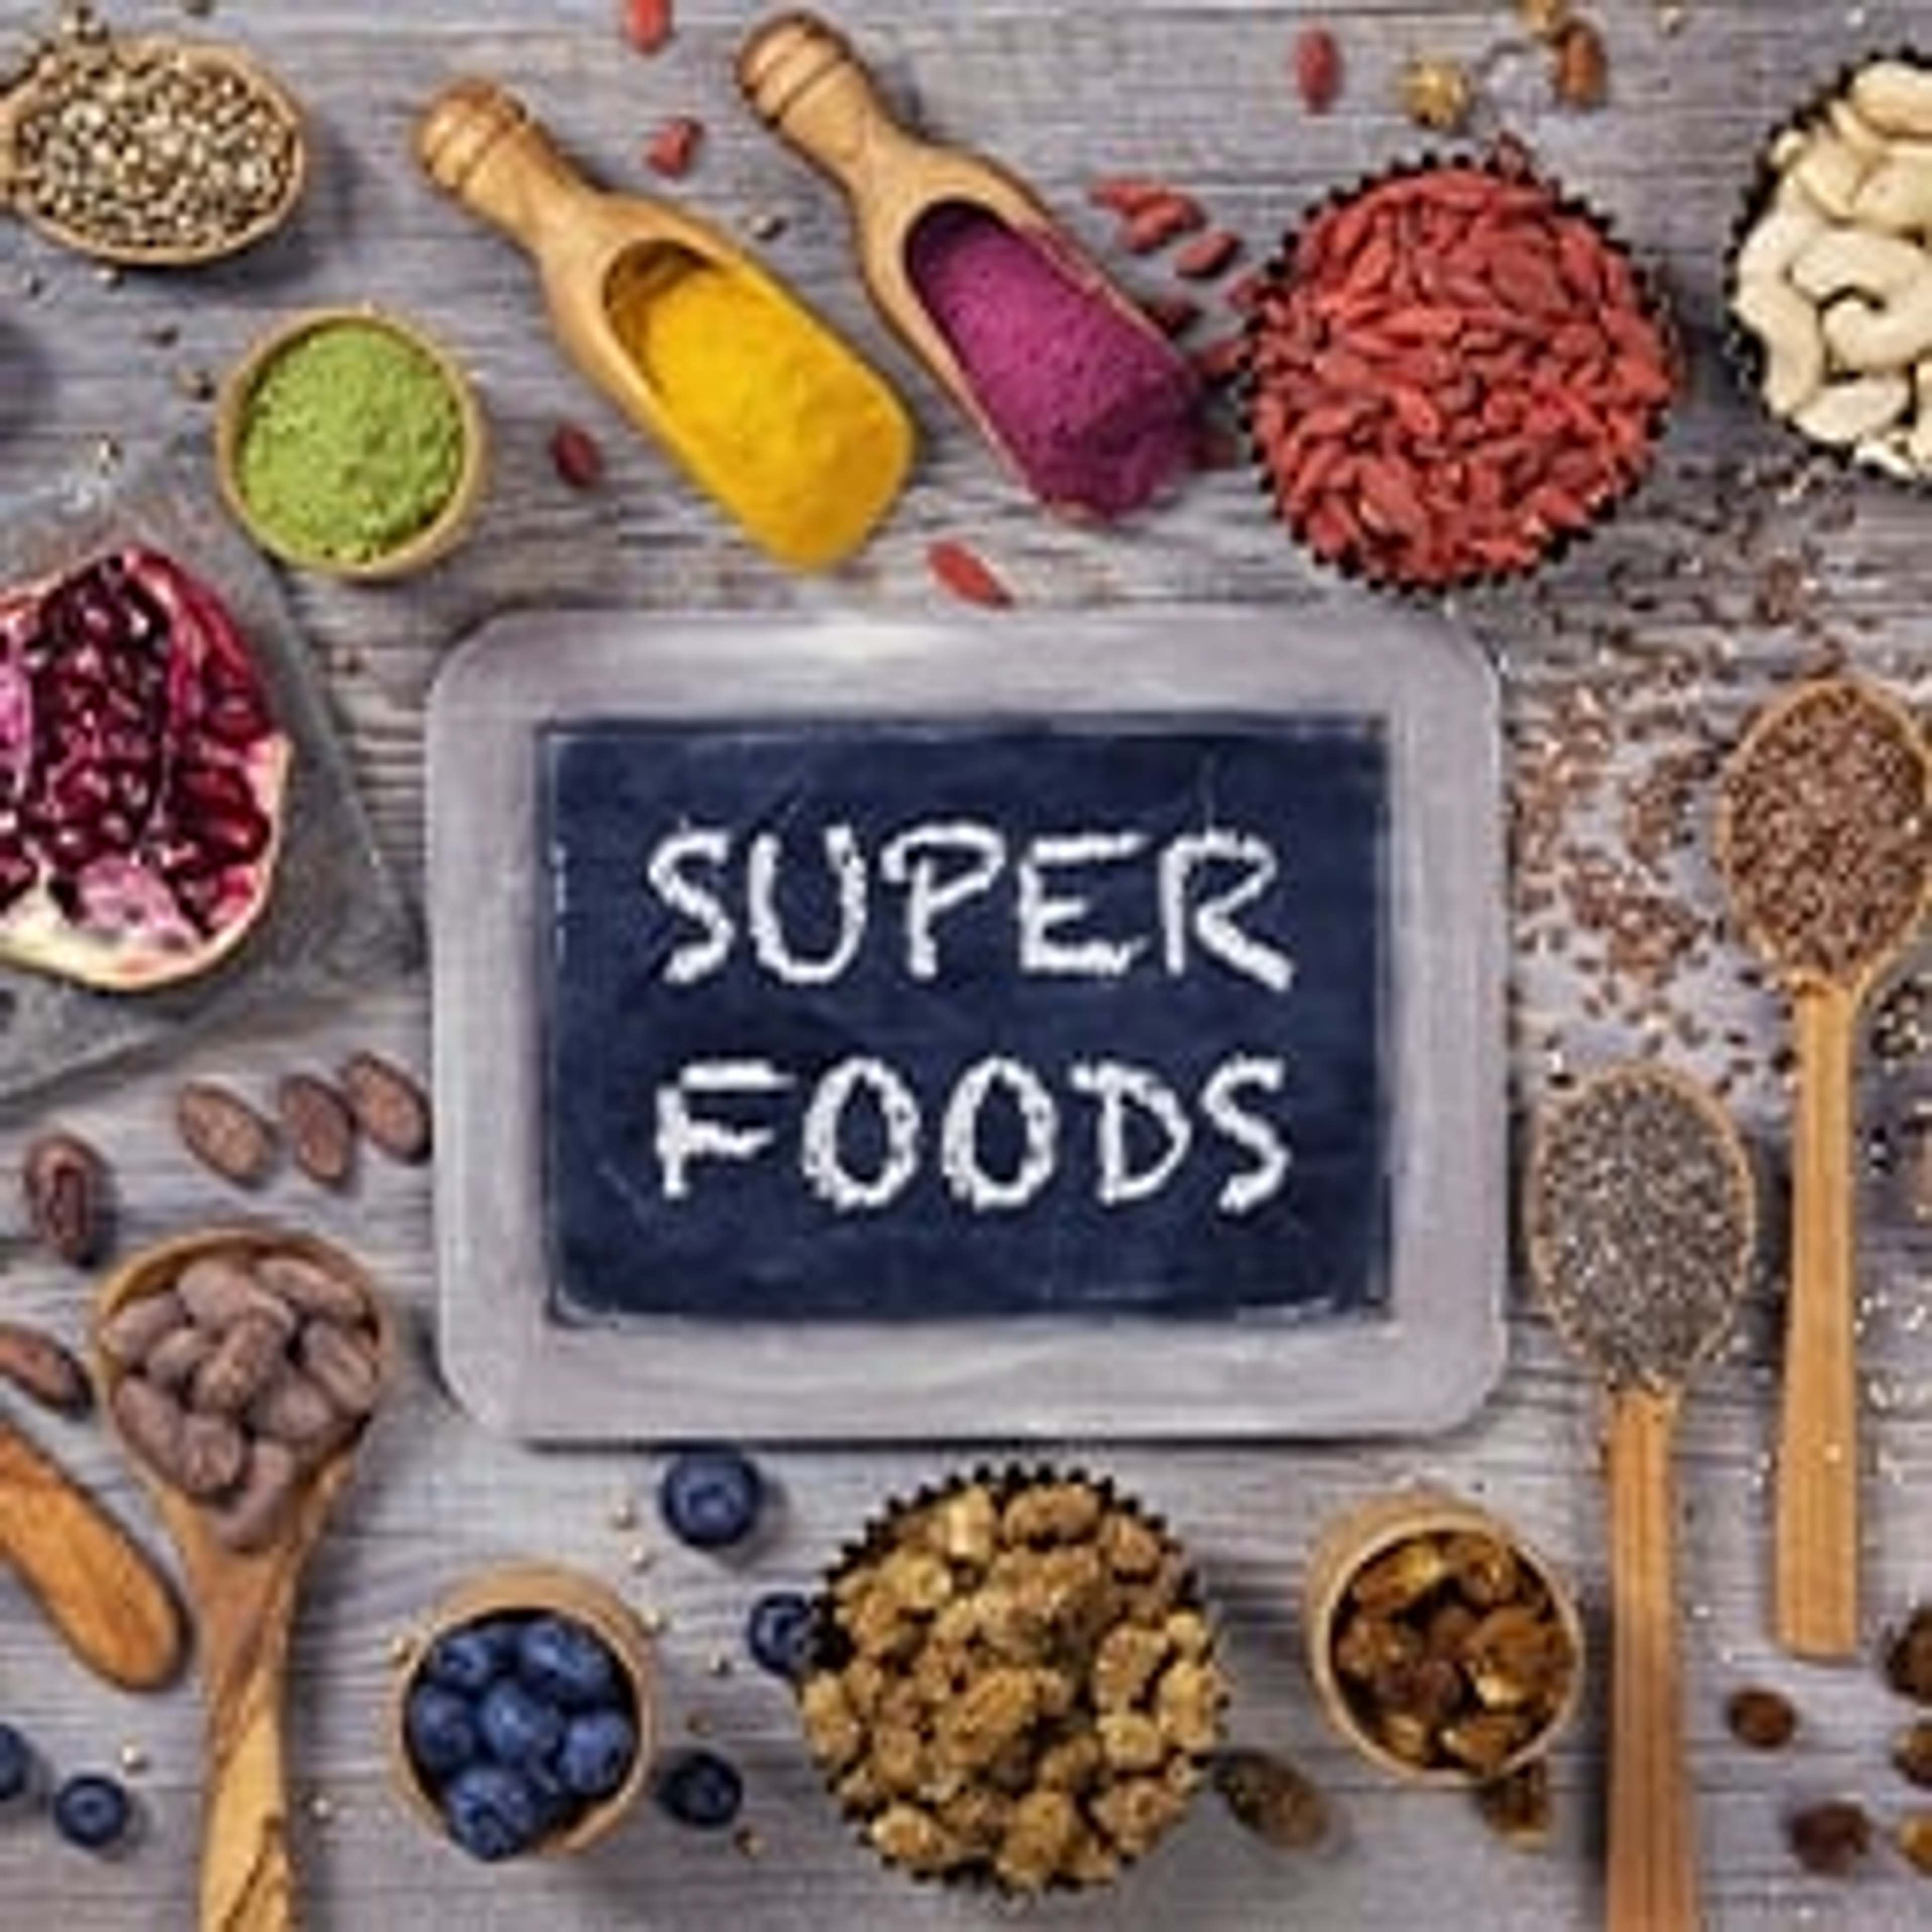 Superfoods are packed with health benefitting nutrients, vitamins, minerals, and antioxidants.